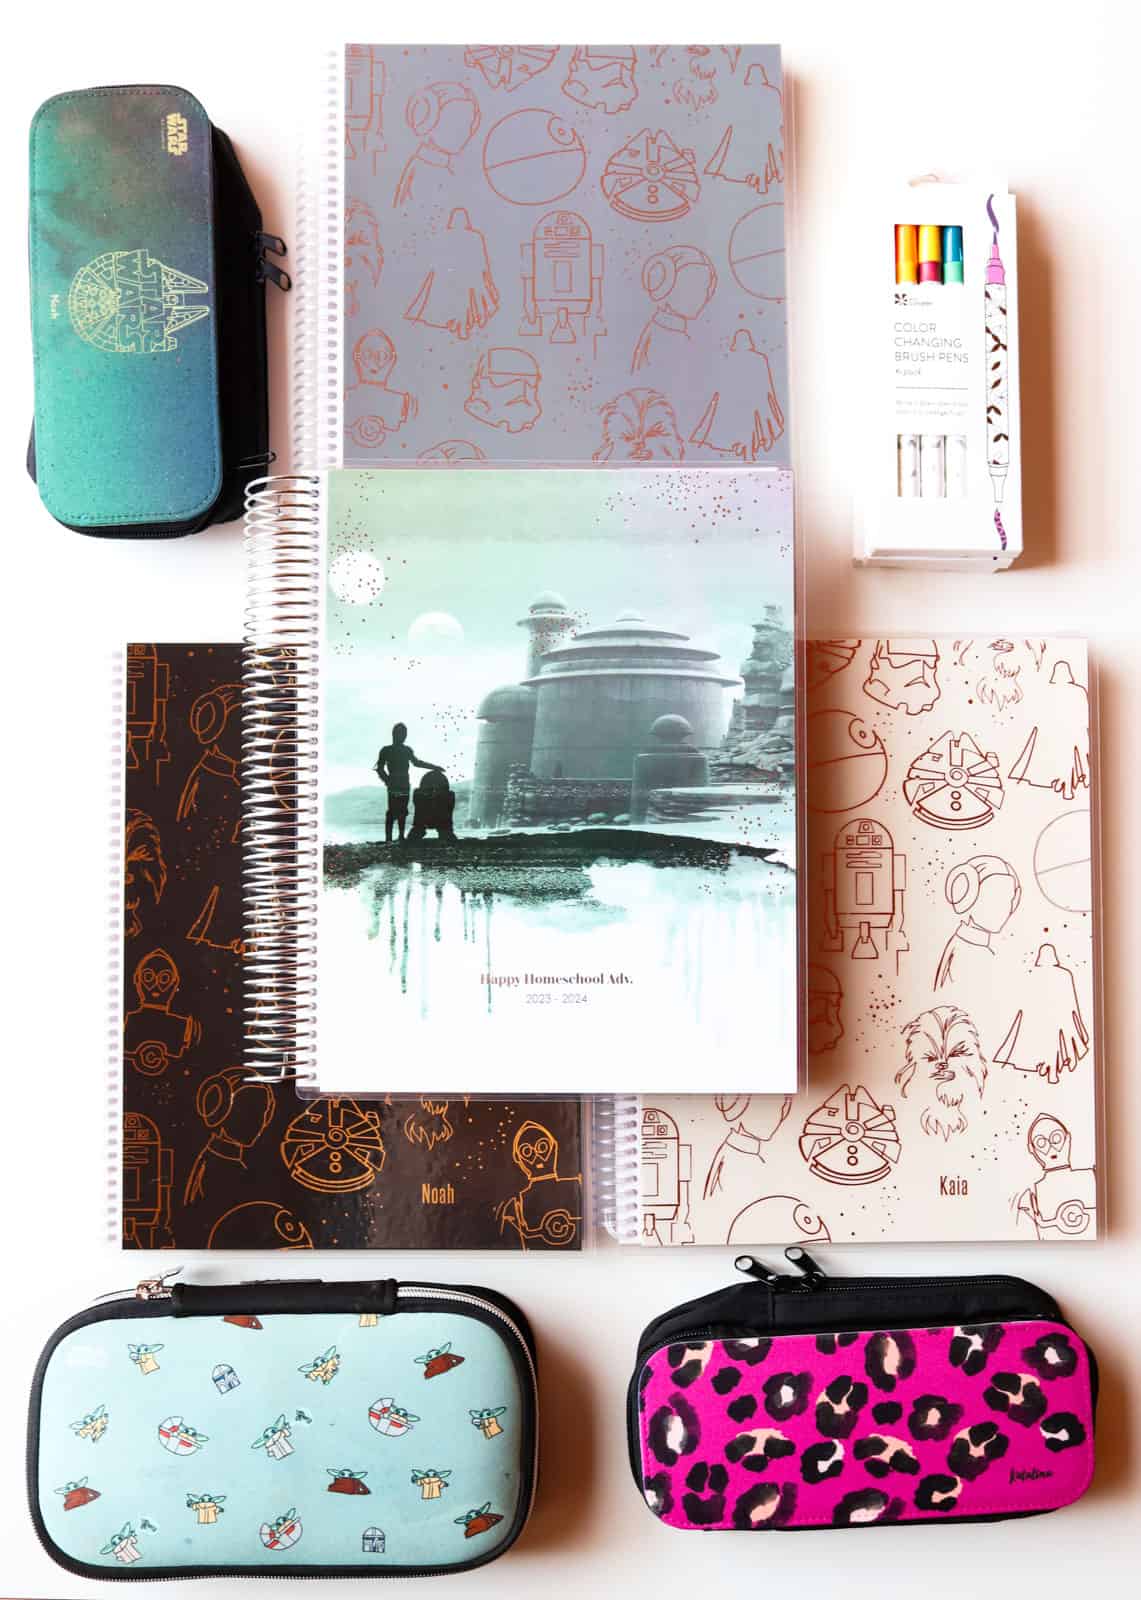 Erin Condren Star Wars Tatooine watercolor teacher lesson planner, pencil cases, kids handwriting and story journals, and color changing pens